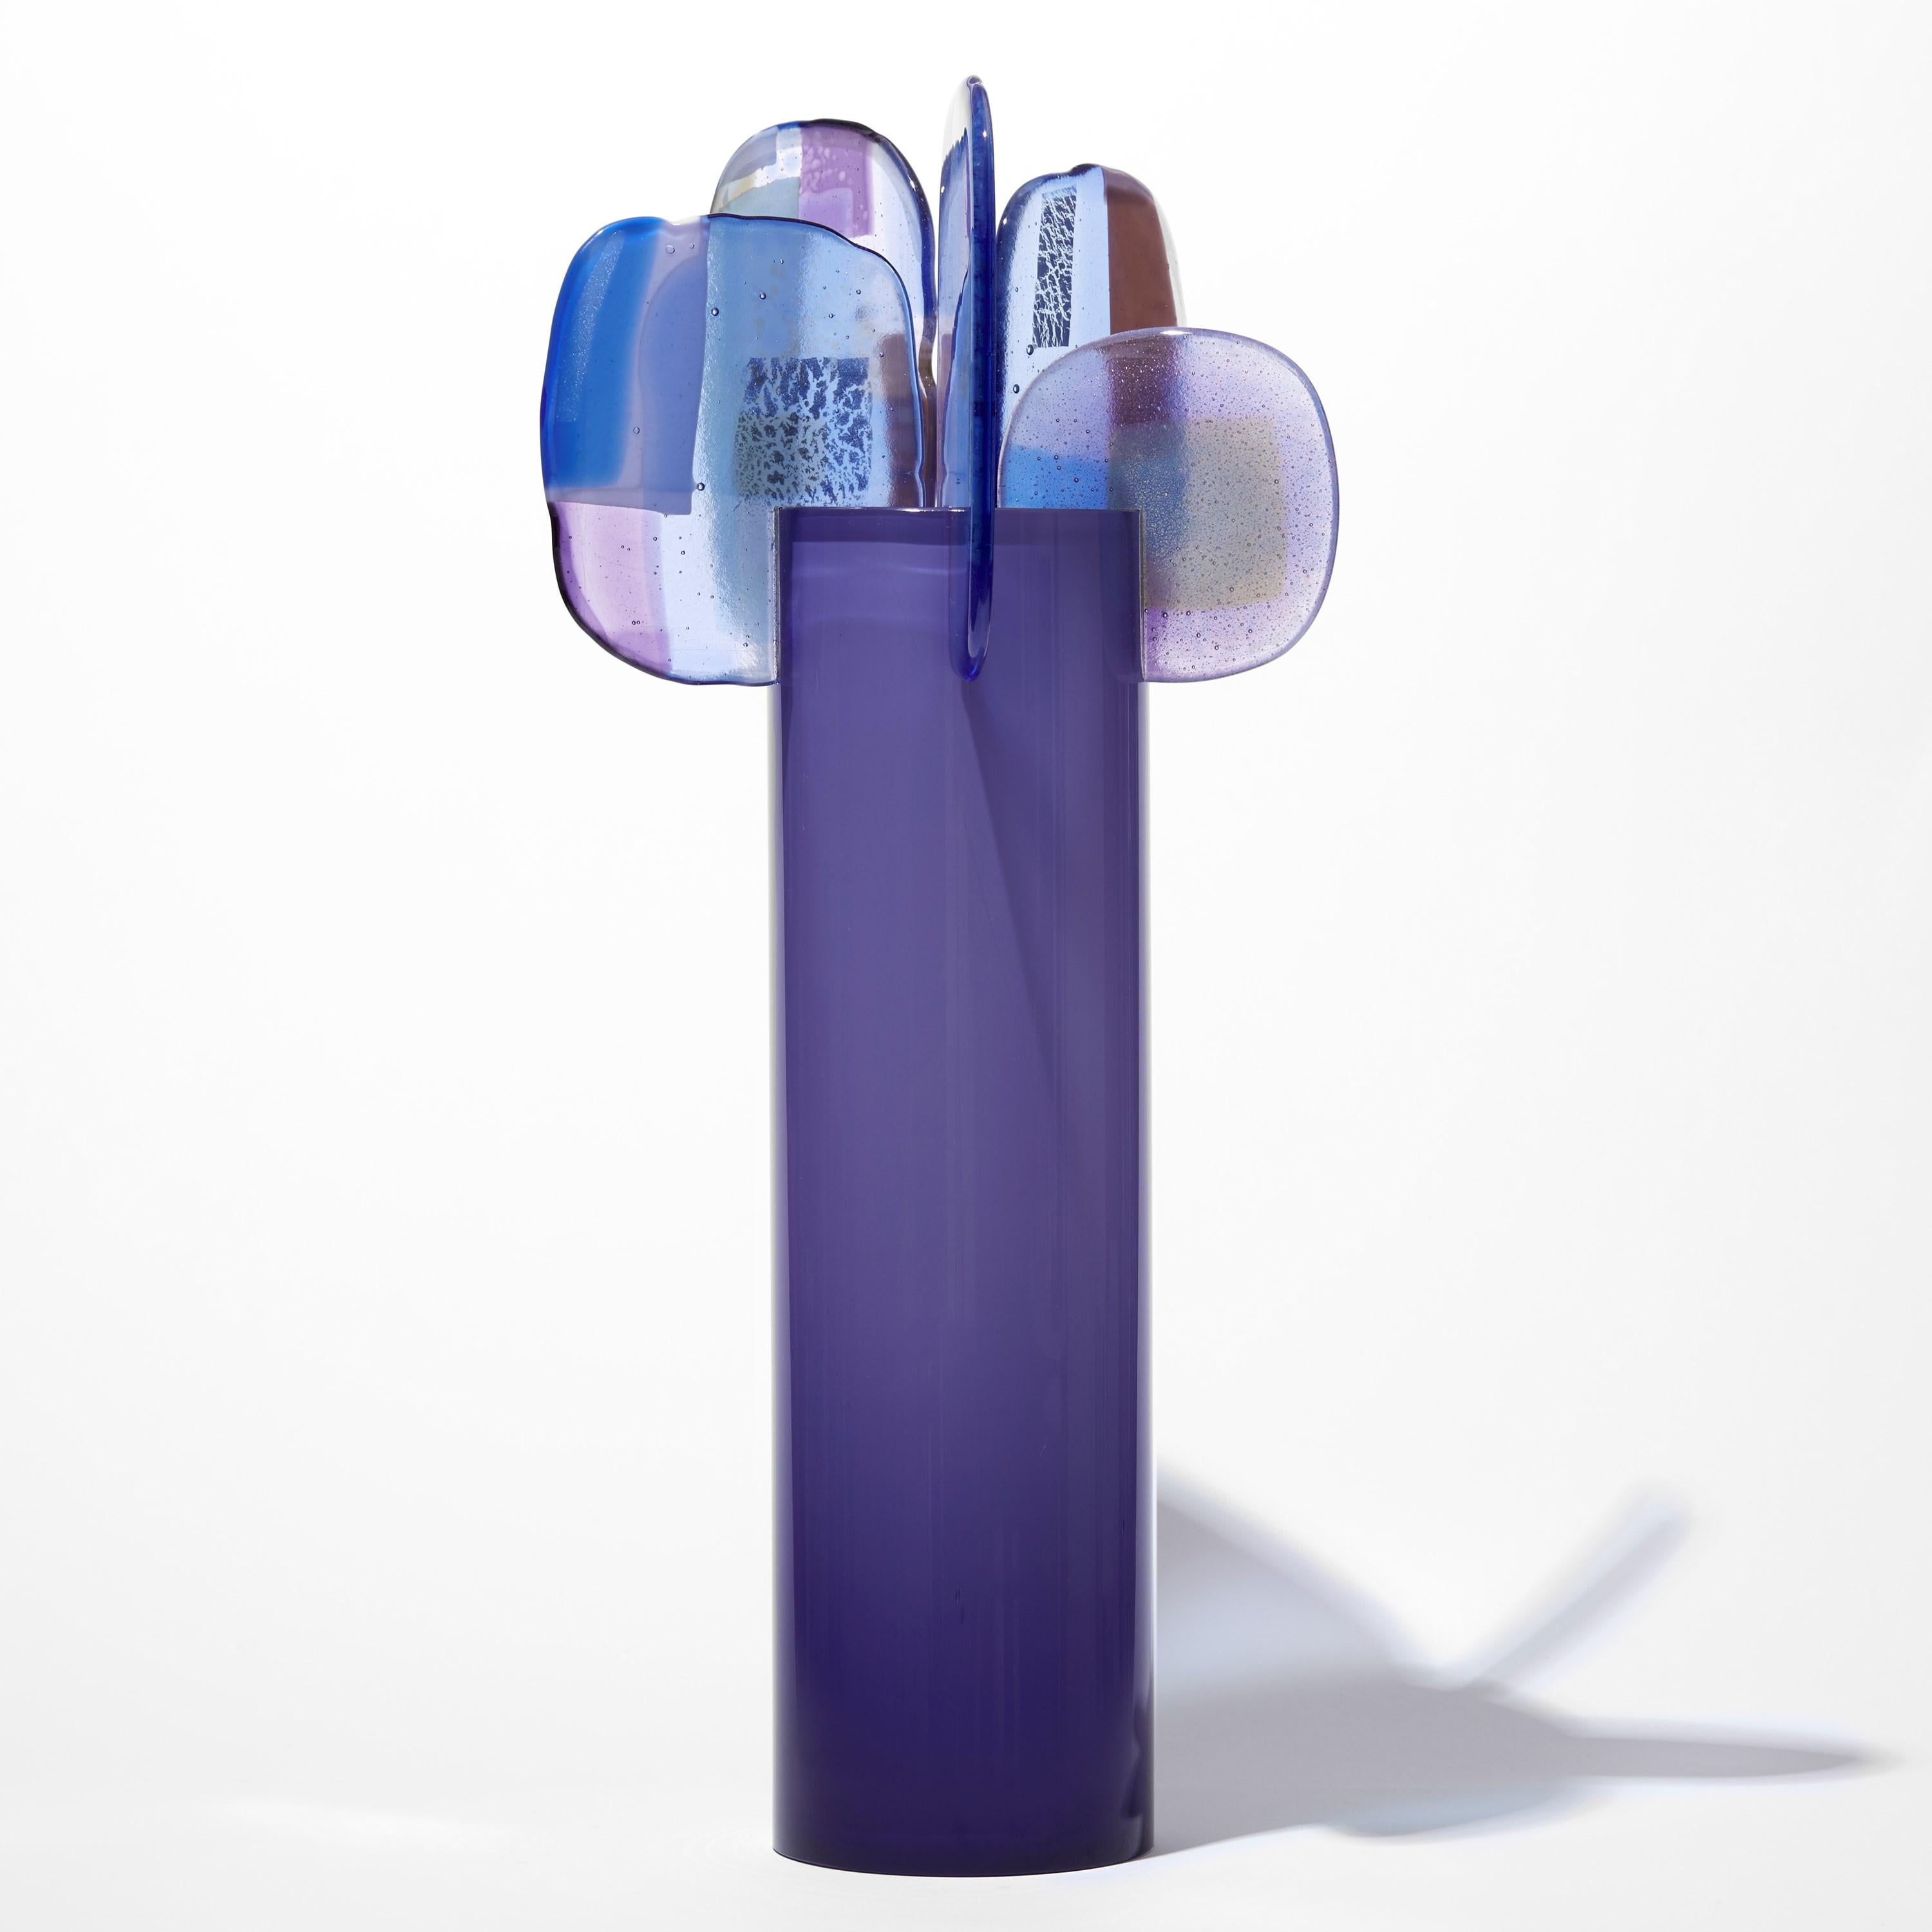 Organic Modern Paradise 08 in Amethyst, a purple, blue & mauve glass sculpture by Amy Cushing